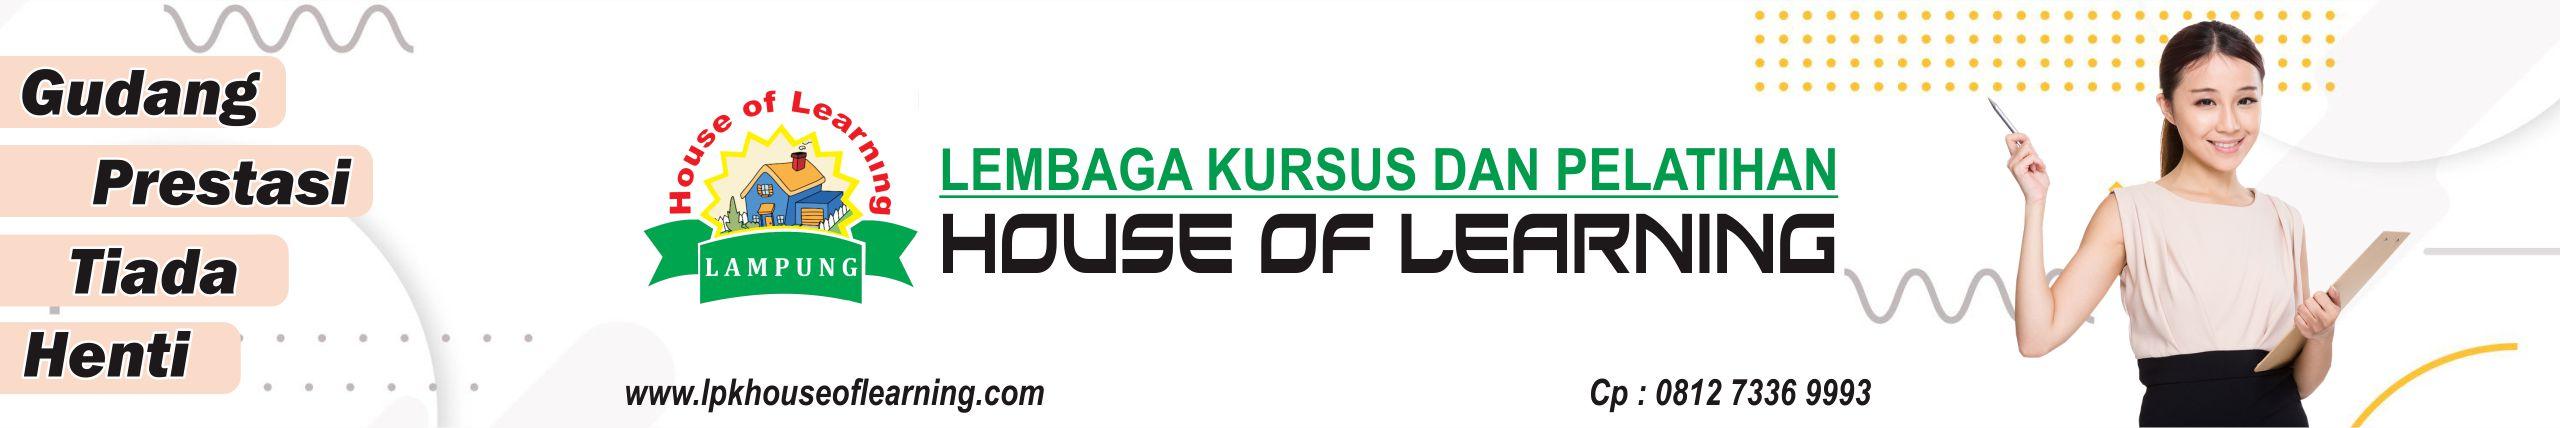 House of Learning